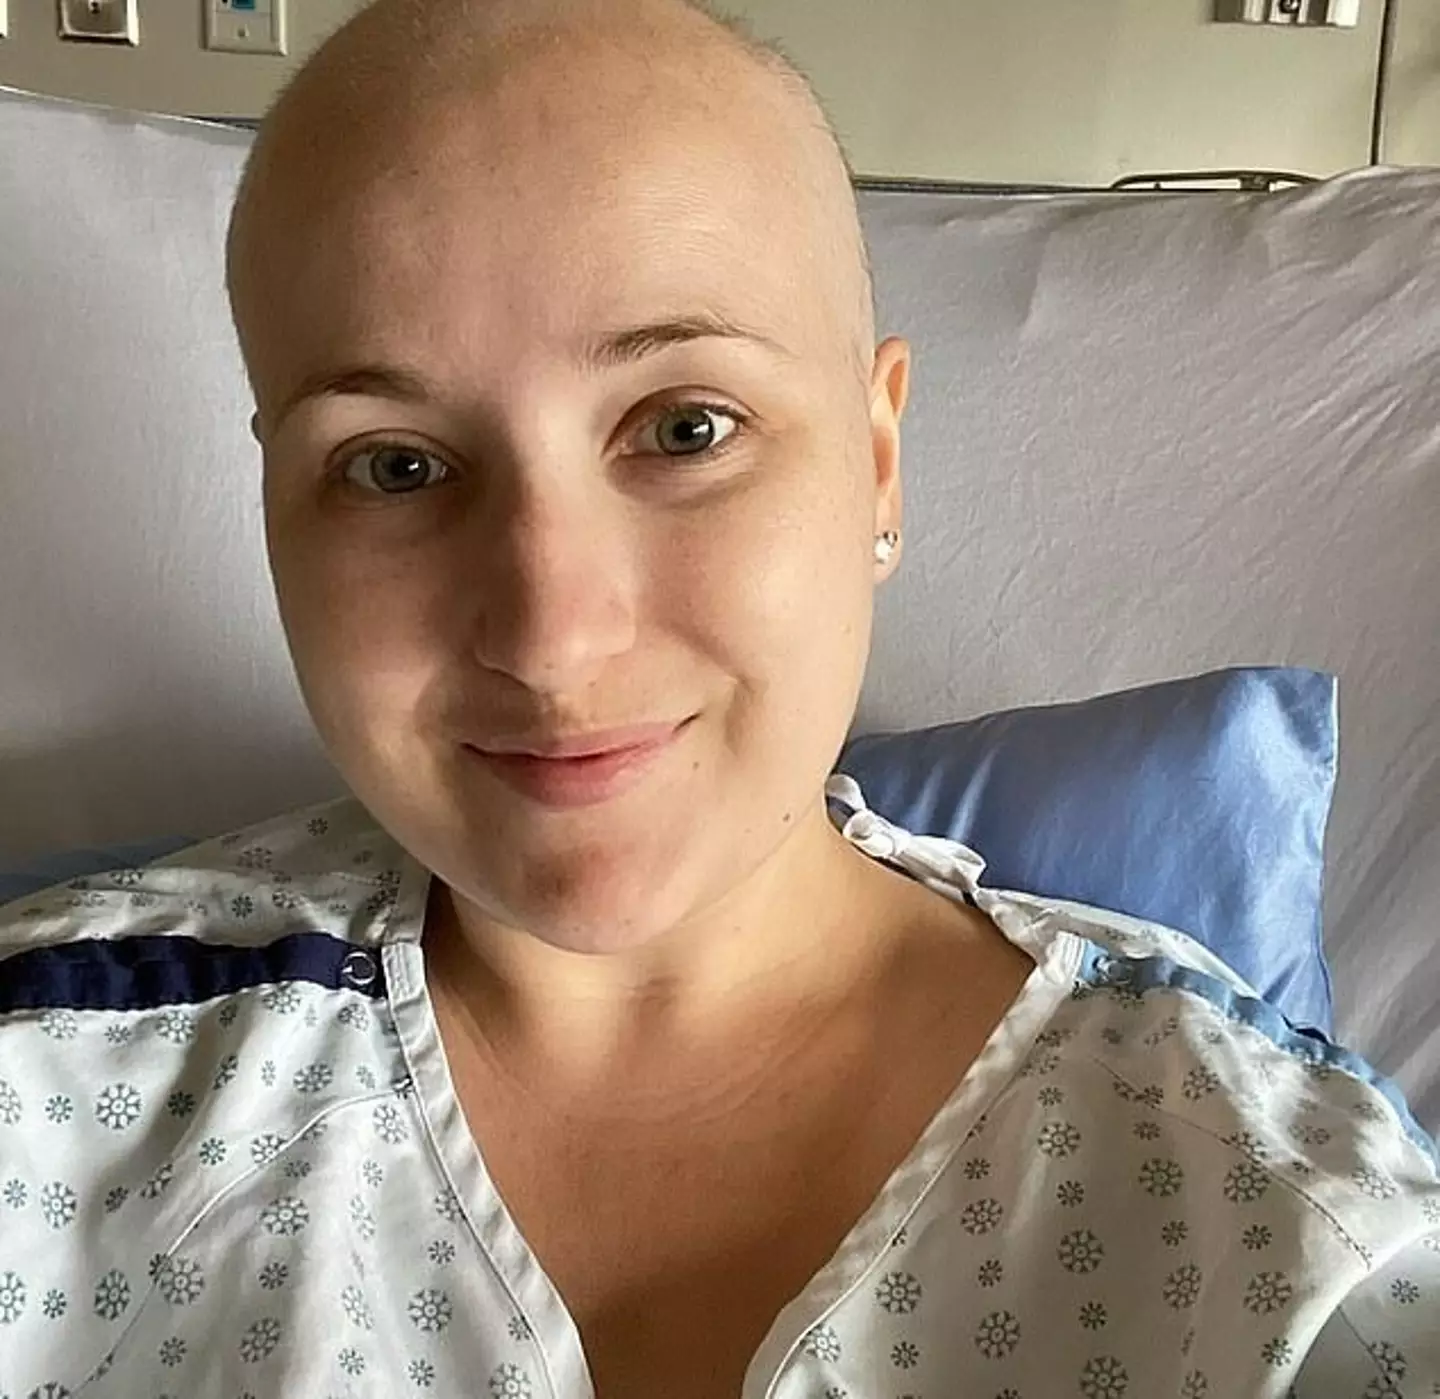 Kimberley officially died on 8 May in Calgary, Alberta, according to an online obituary. (Instagram/@cancerpatientmd)